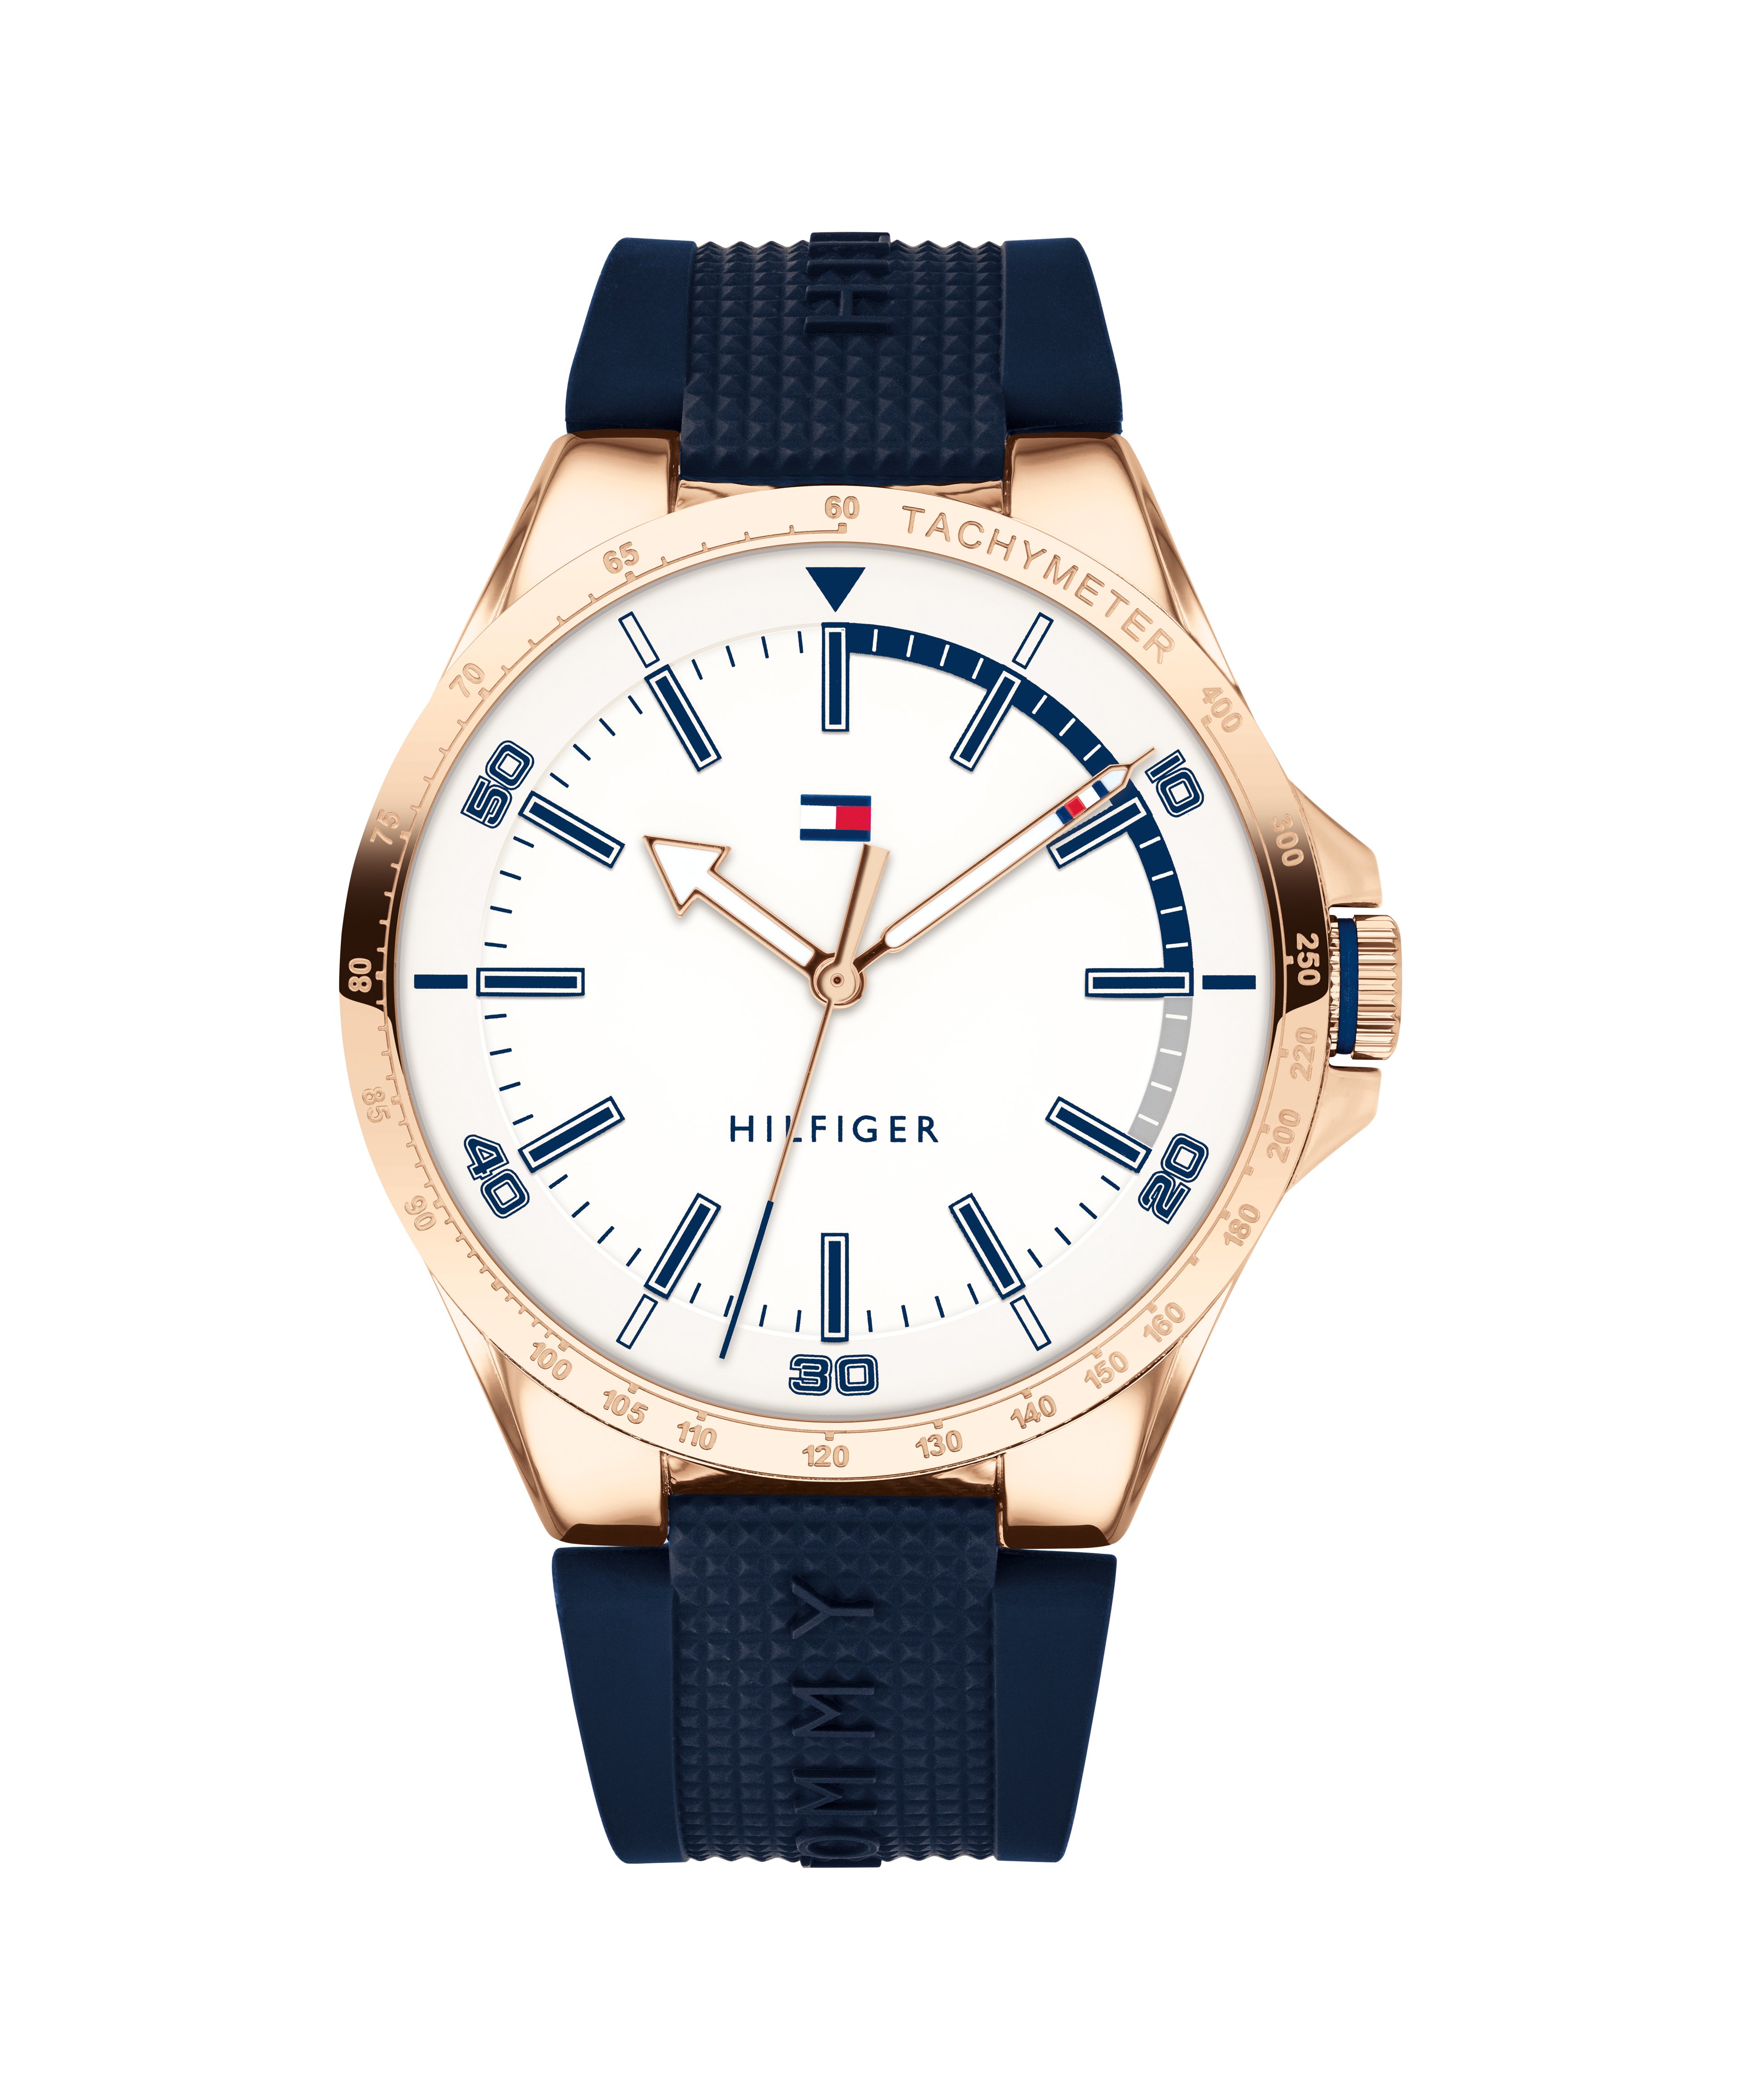 Claire væv leksikon Tommy Hilfiger Watches| Movado Company Store 